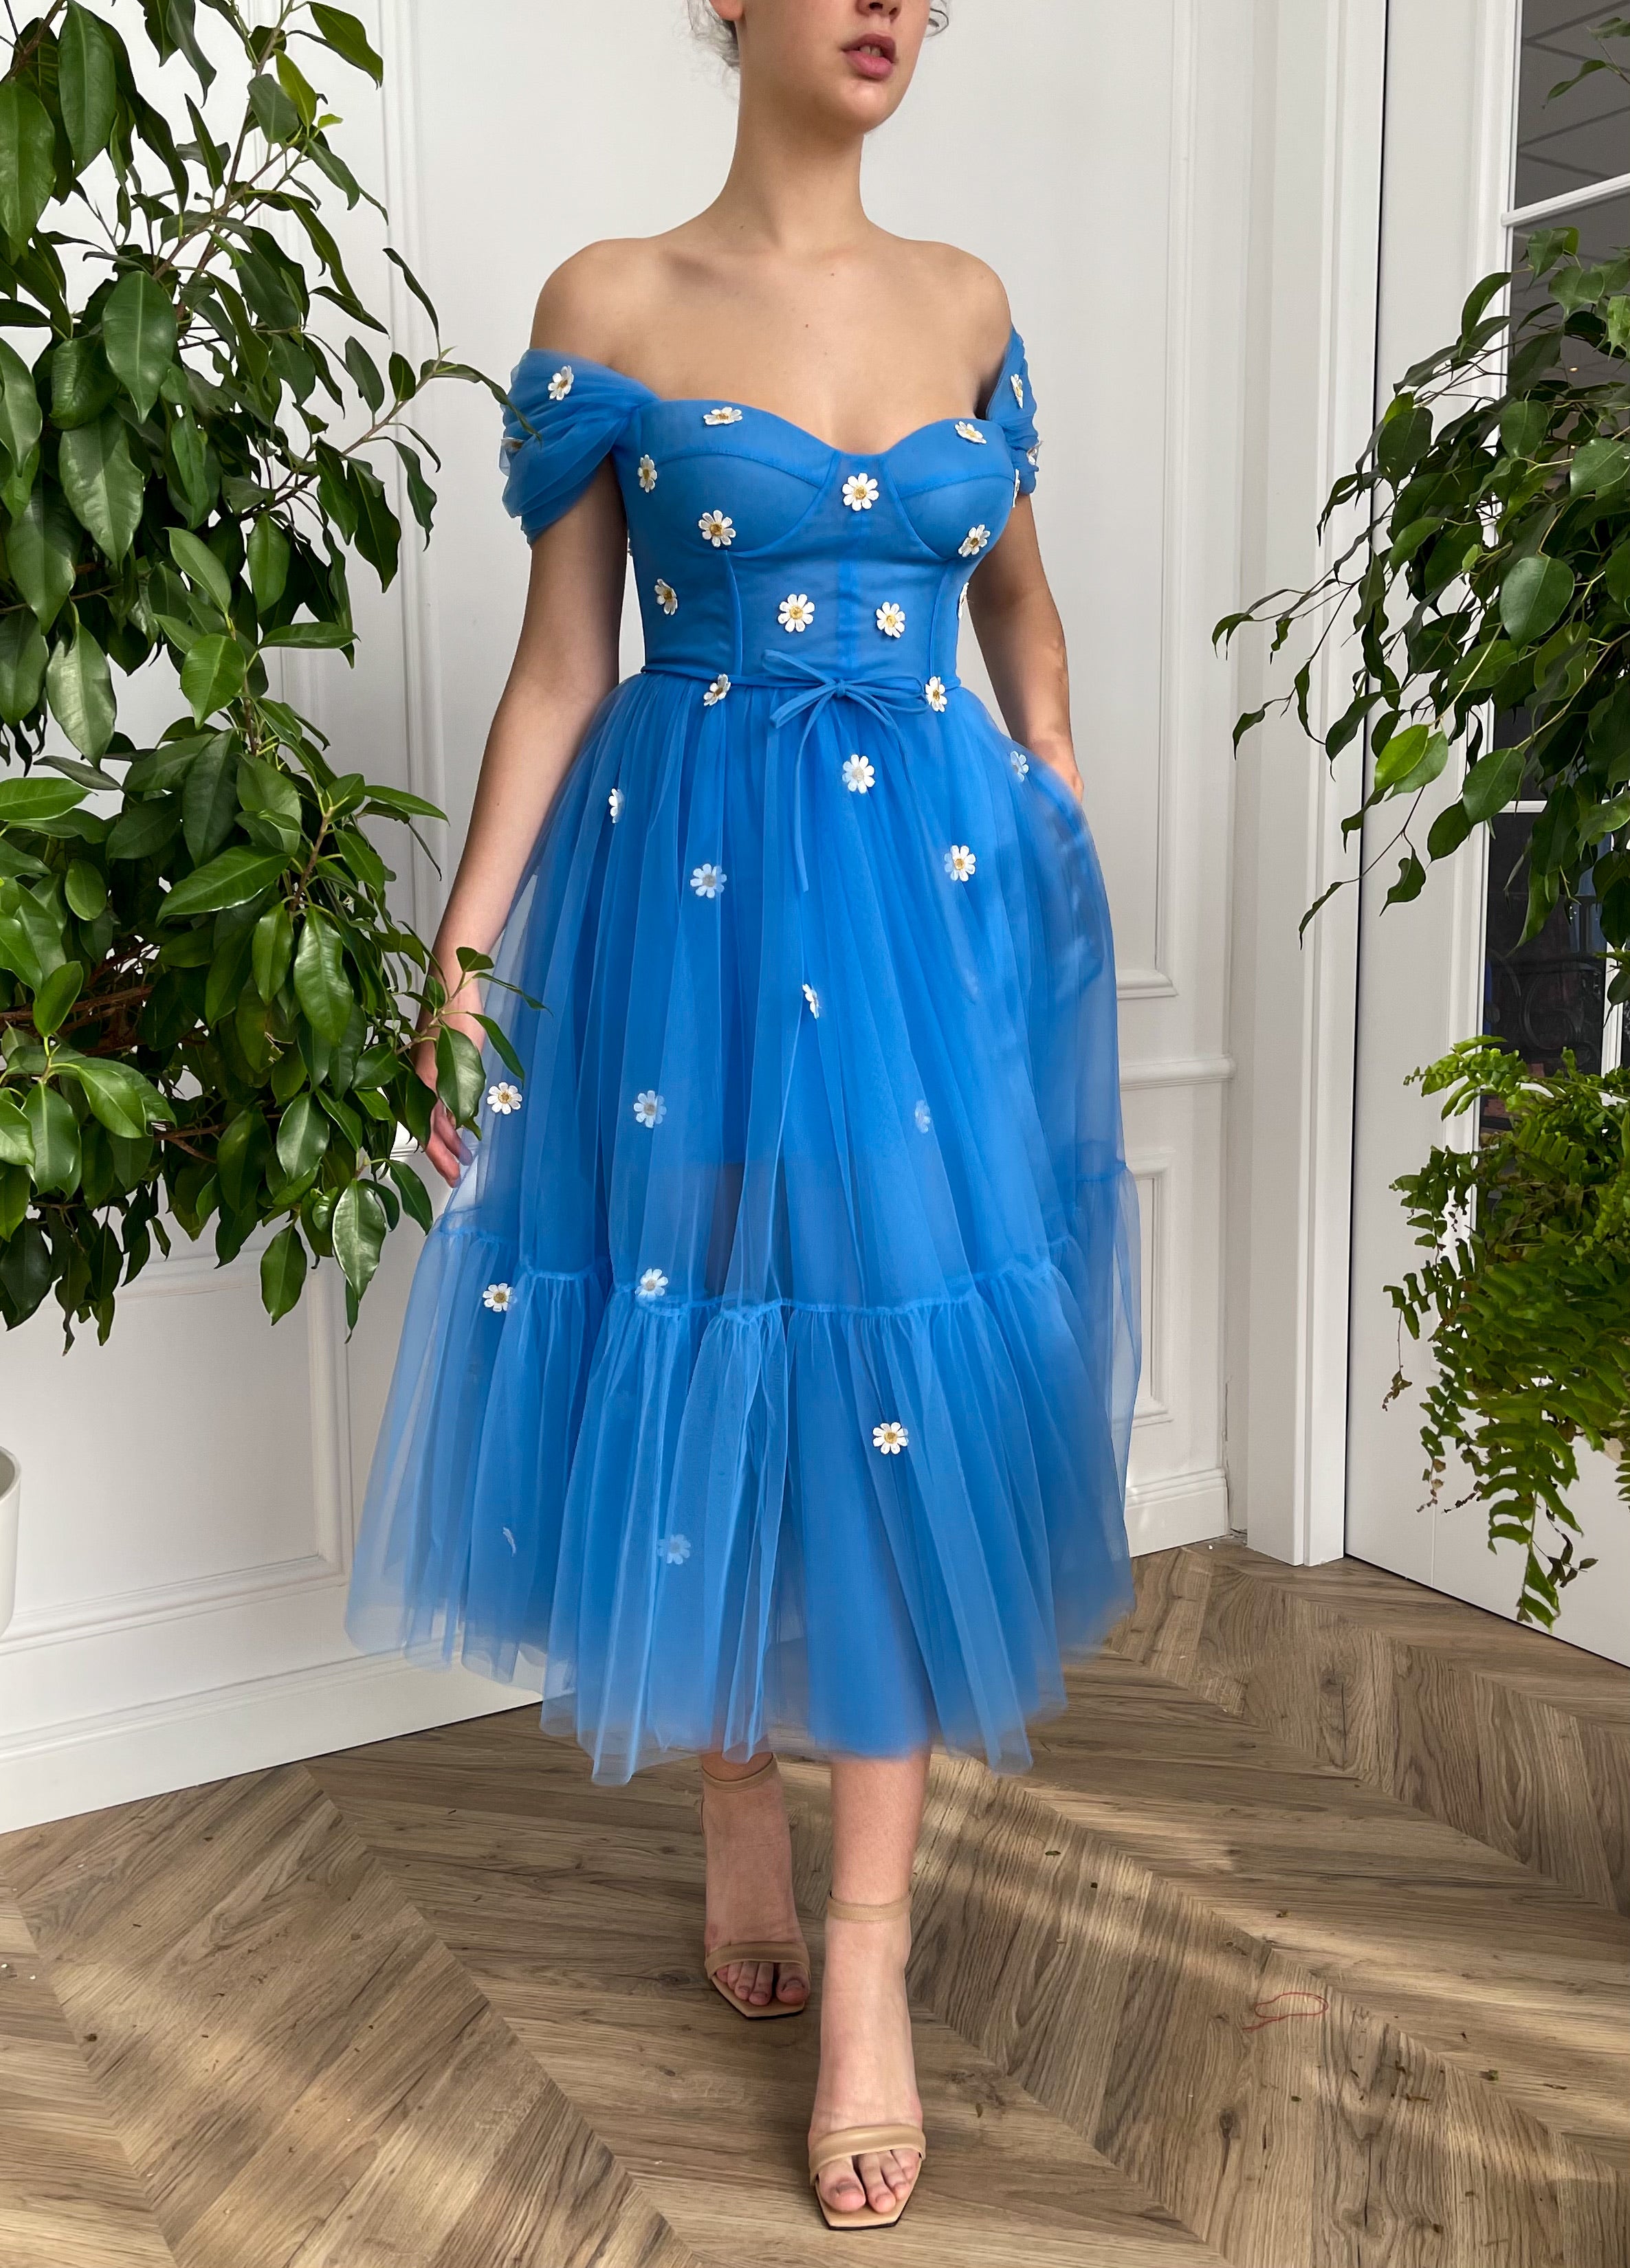 Blue midi dress with off the shoulder sleeves and embroidered daisies